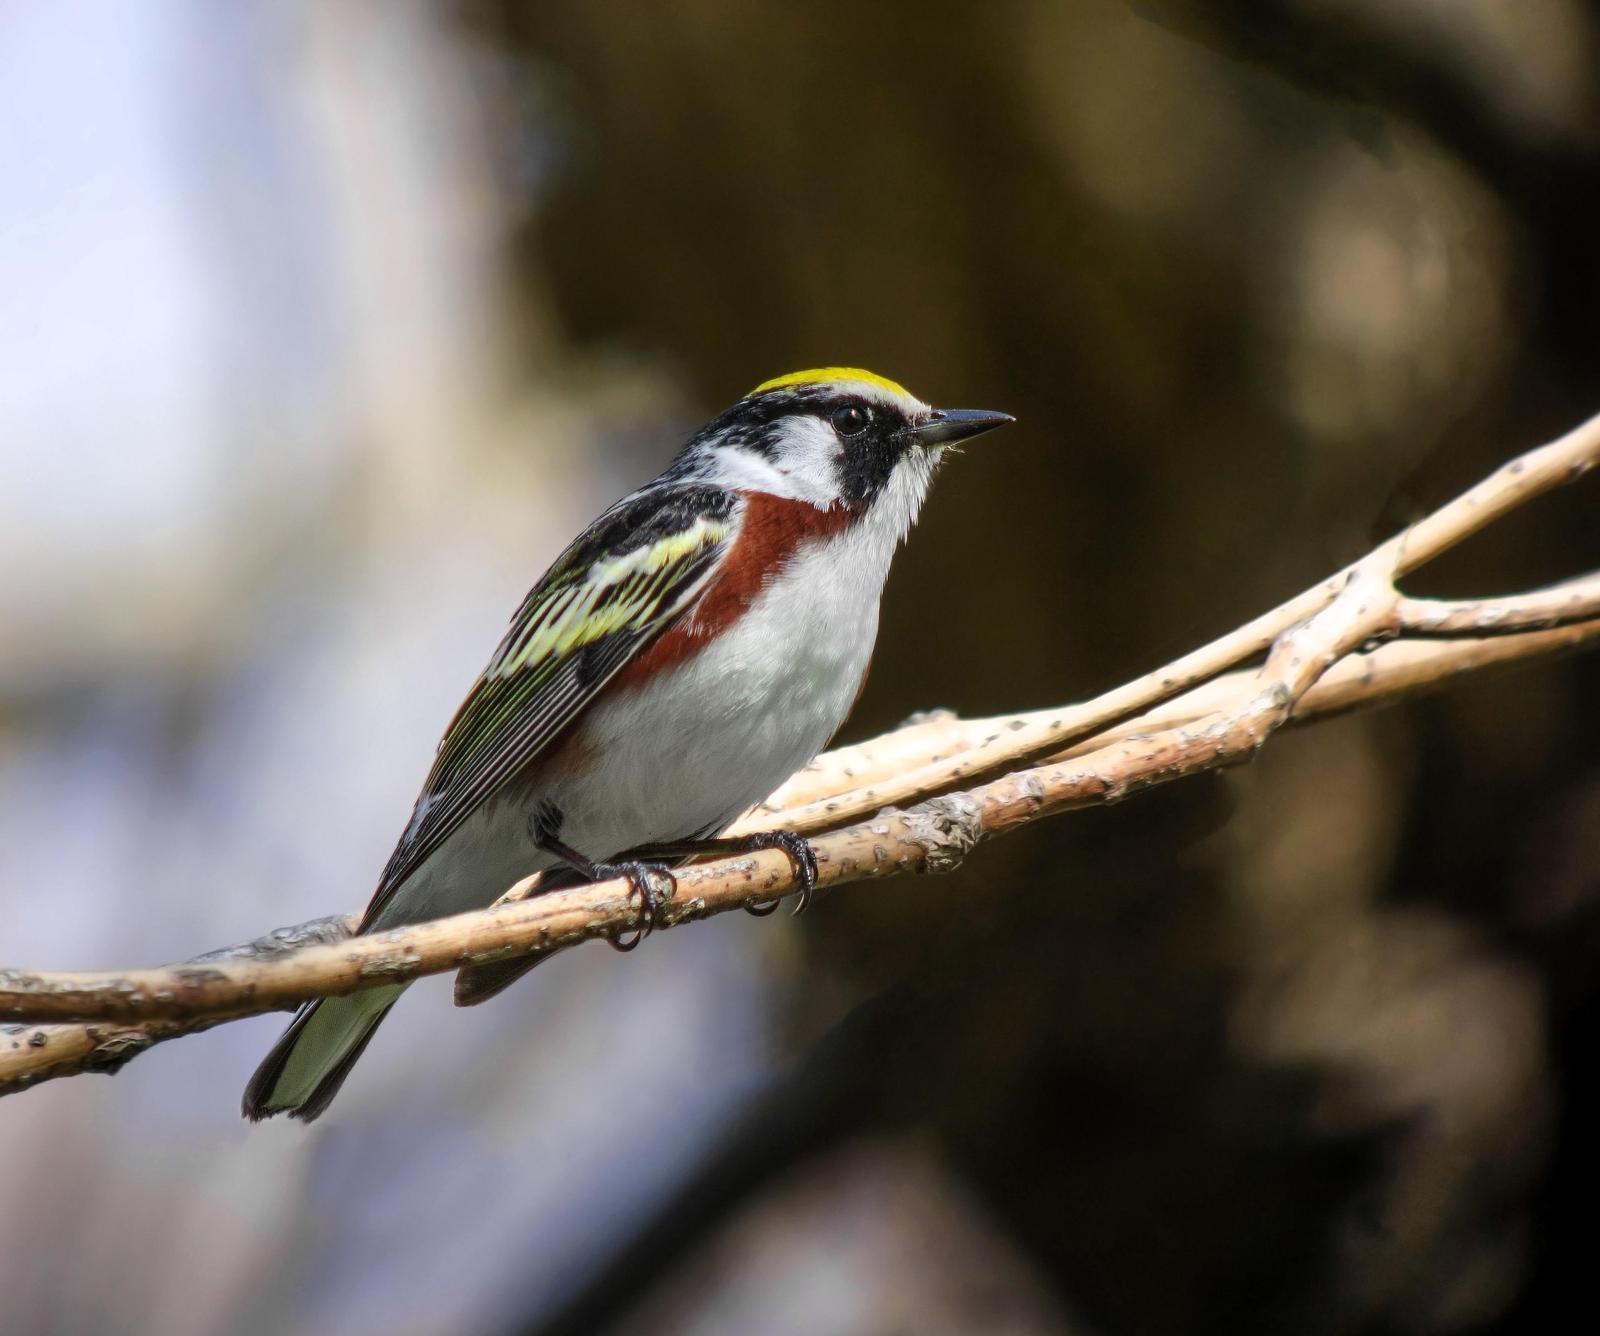 Chestnut-sided Warbler Photo by Joseph Pescatore